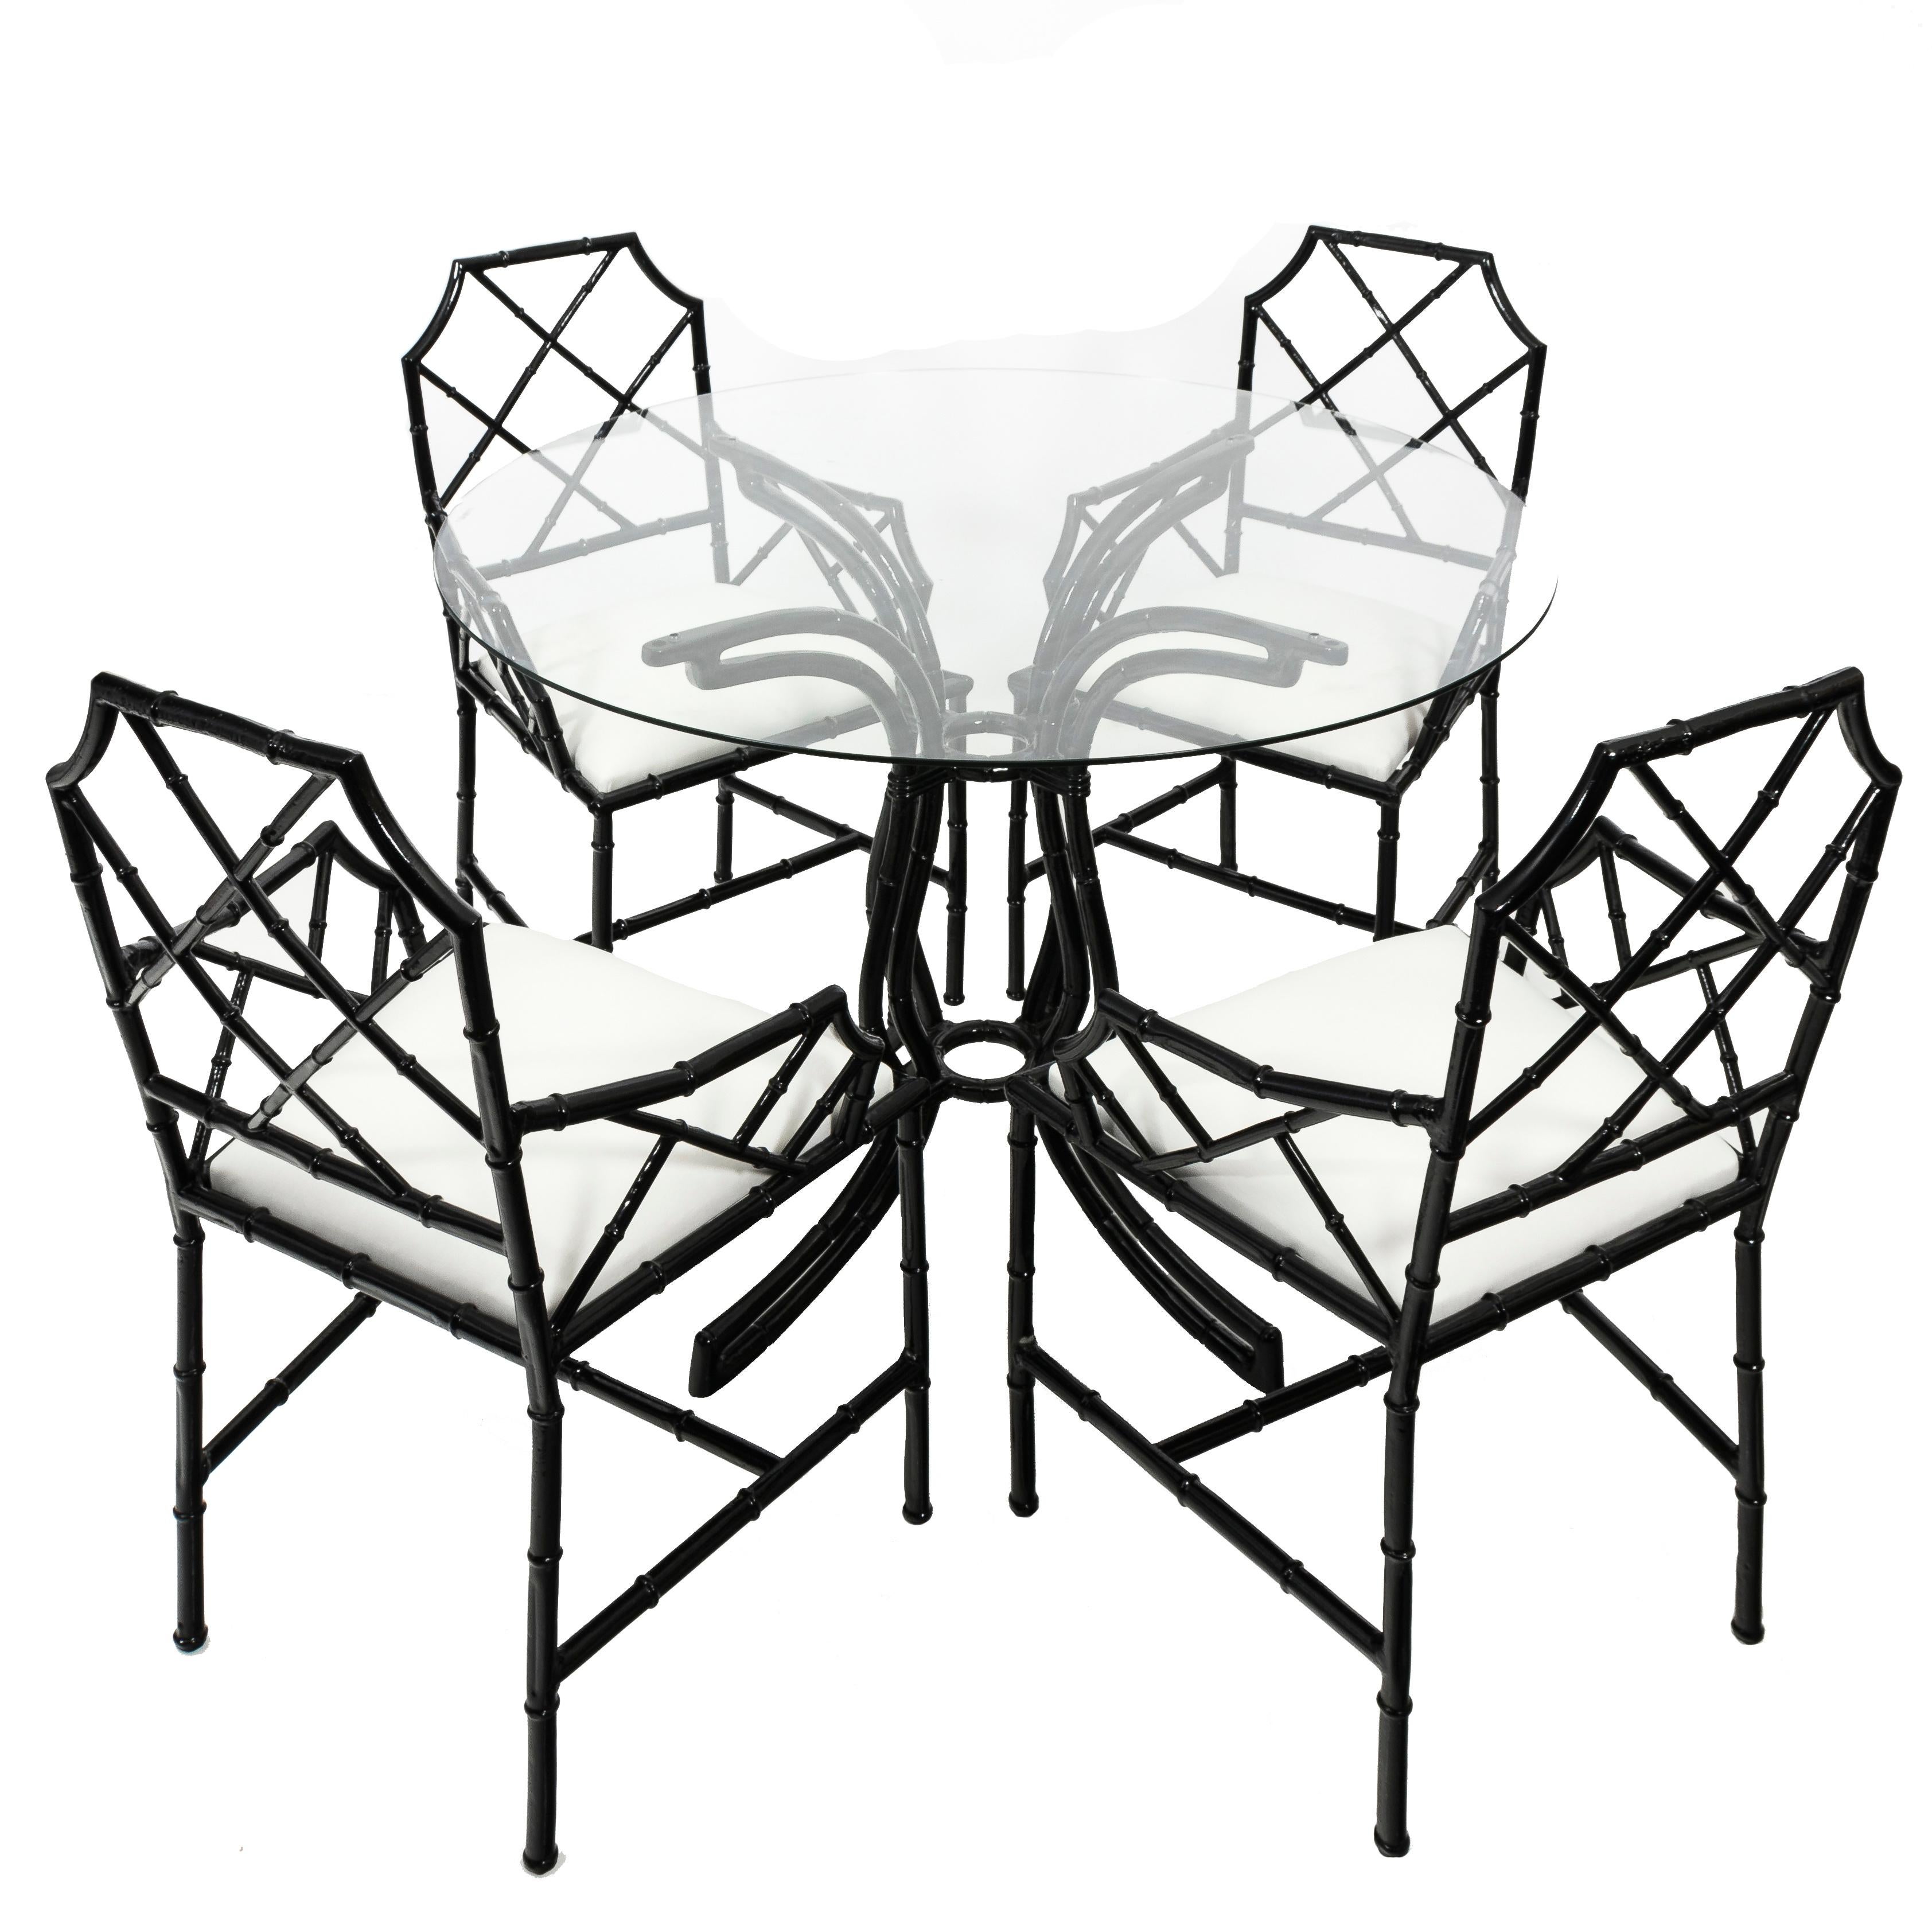 Set of four black Chinese Chippendale-style metal bamboo chairs. Newly powder coated in black gloss finish. Newly upholstered in white indoor/outdoor linen fabric. Table has a new clear glass round top. Suitable for indoor or outdoor use. Table is